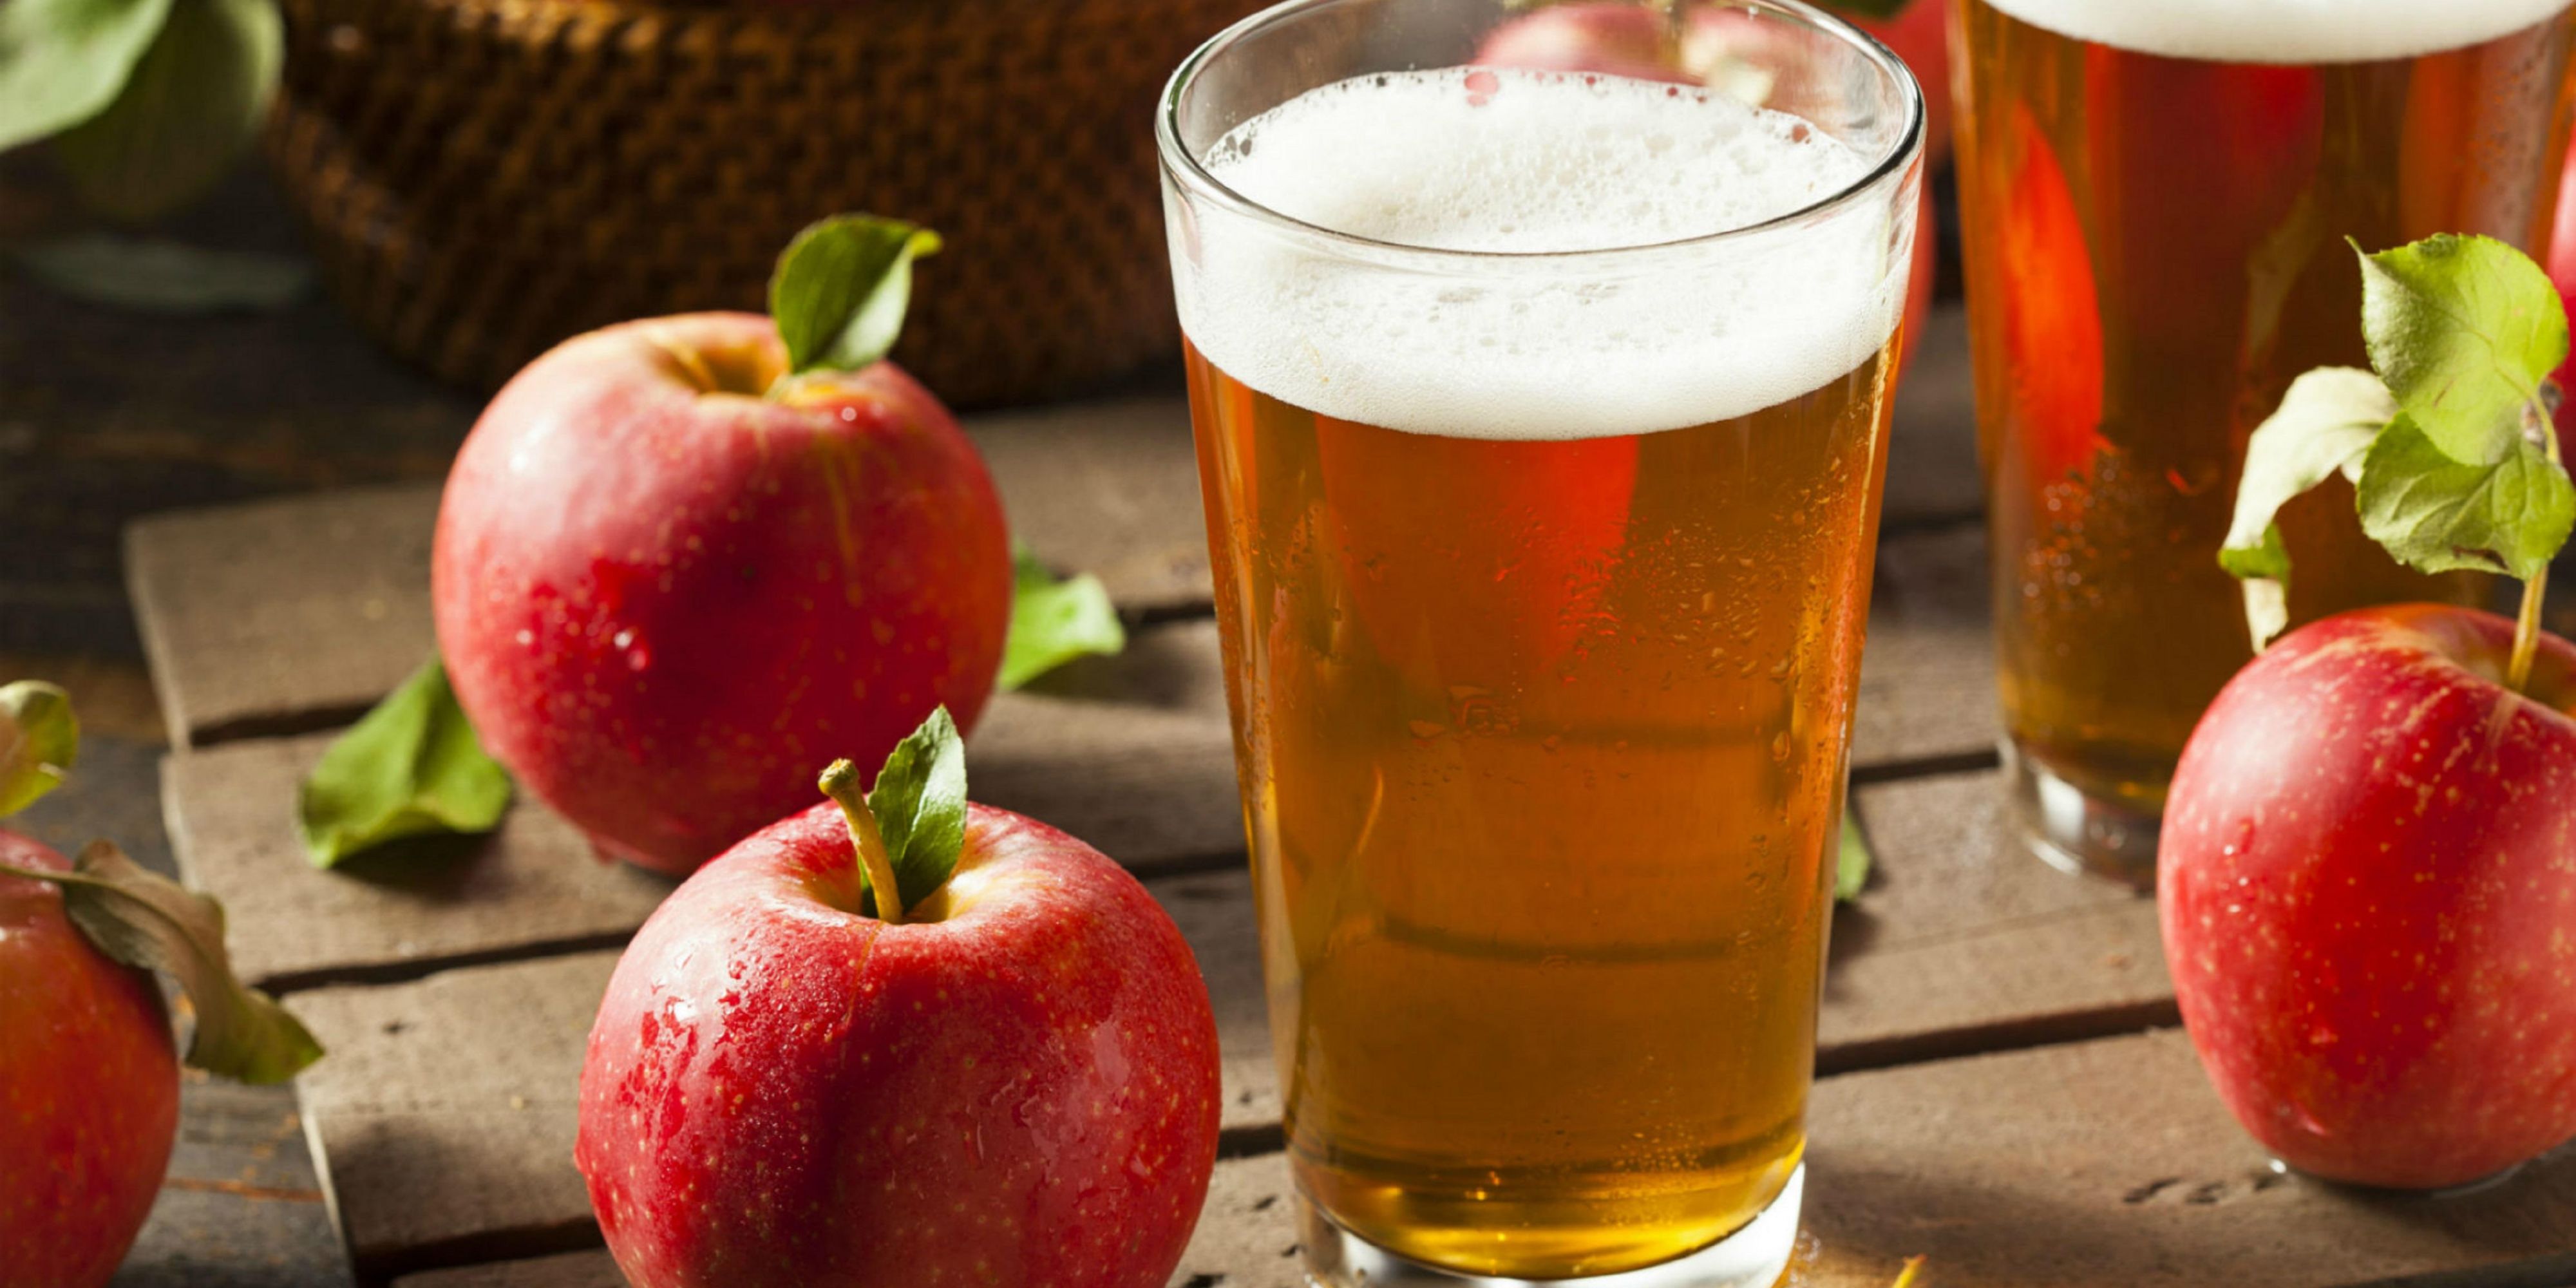 Angry Orchard's 60 acre orchard is located less 15 minutes from our hotel. Come visit us and take a tour! The Hudson Valley also has a long cider making tradition. Before prohibition, cider apple orchards were common to find in the region. Cider has been made here for more than 200 years!